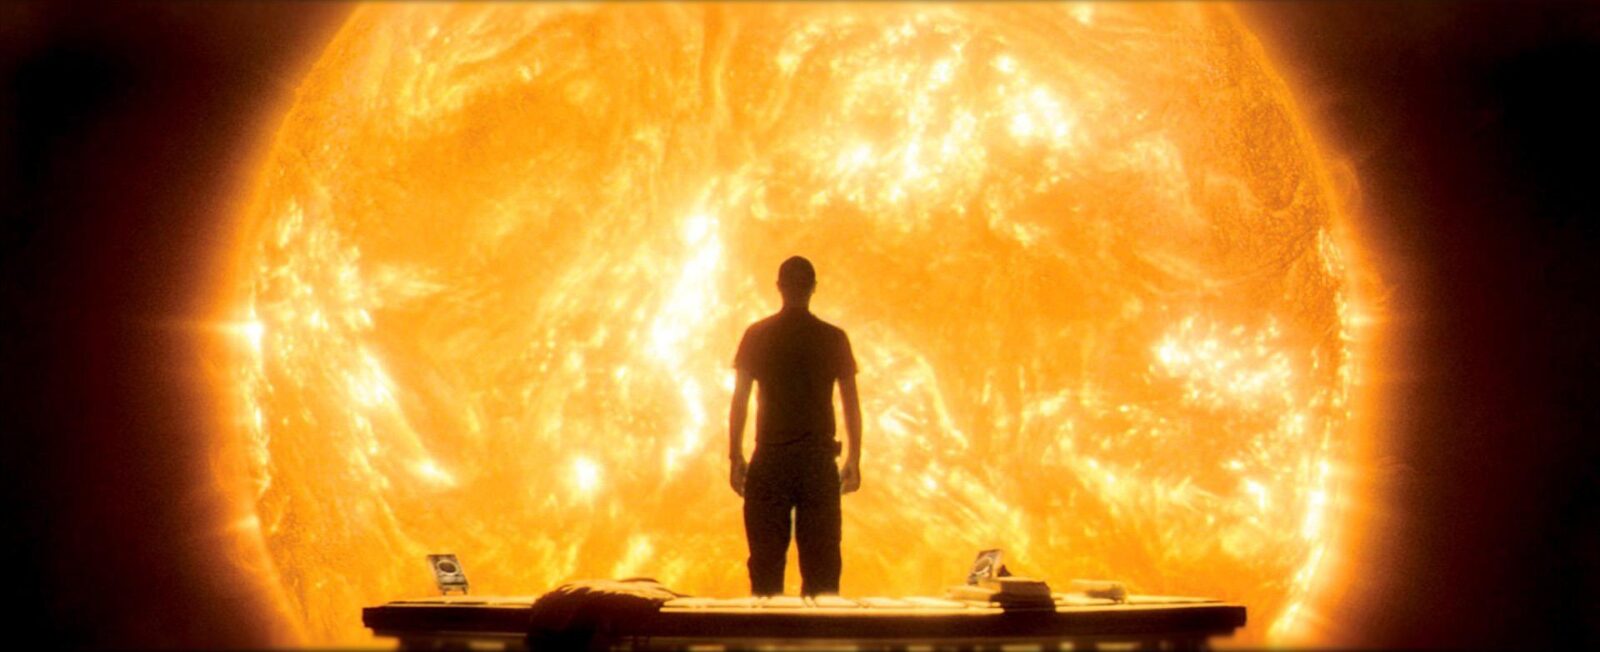 Still from the movie "Sunshine". The character Searle (played by Cliff Curtis) stands with a bench behind him. In front of him is the swirling sun, dimmed but occupying his entire field of vision.